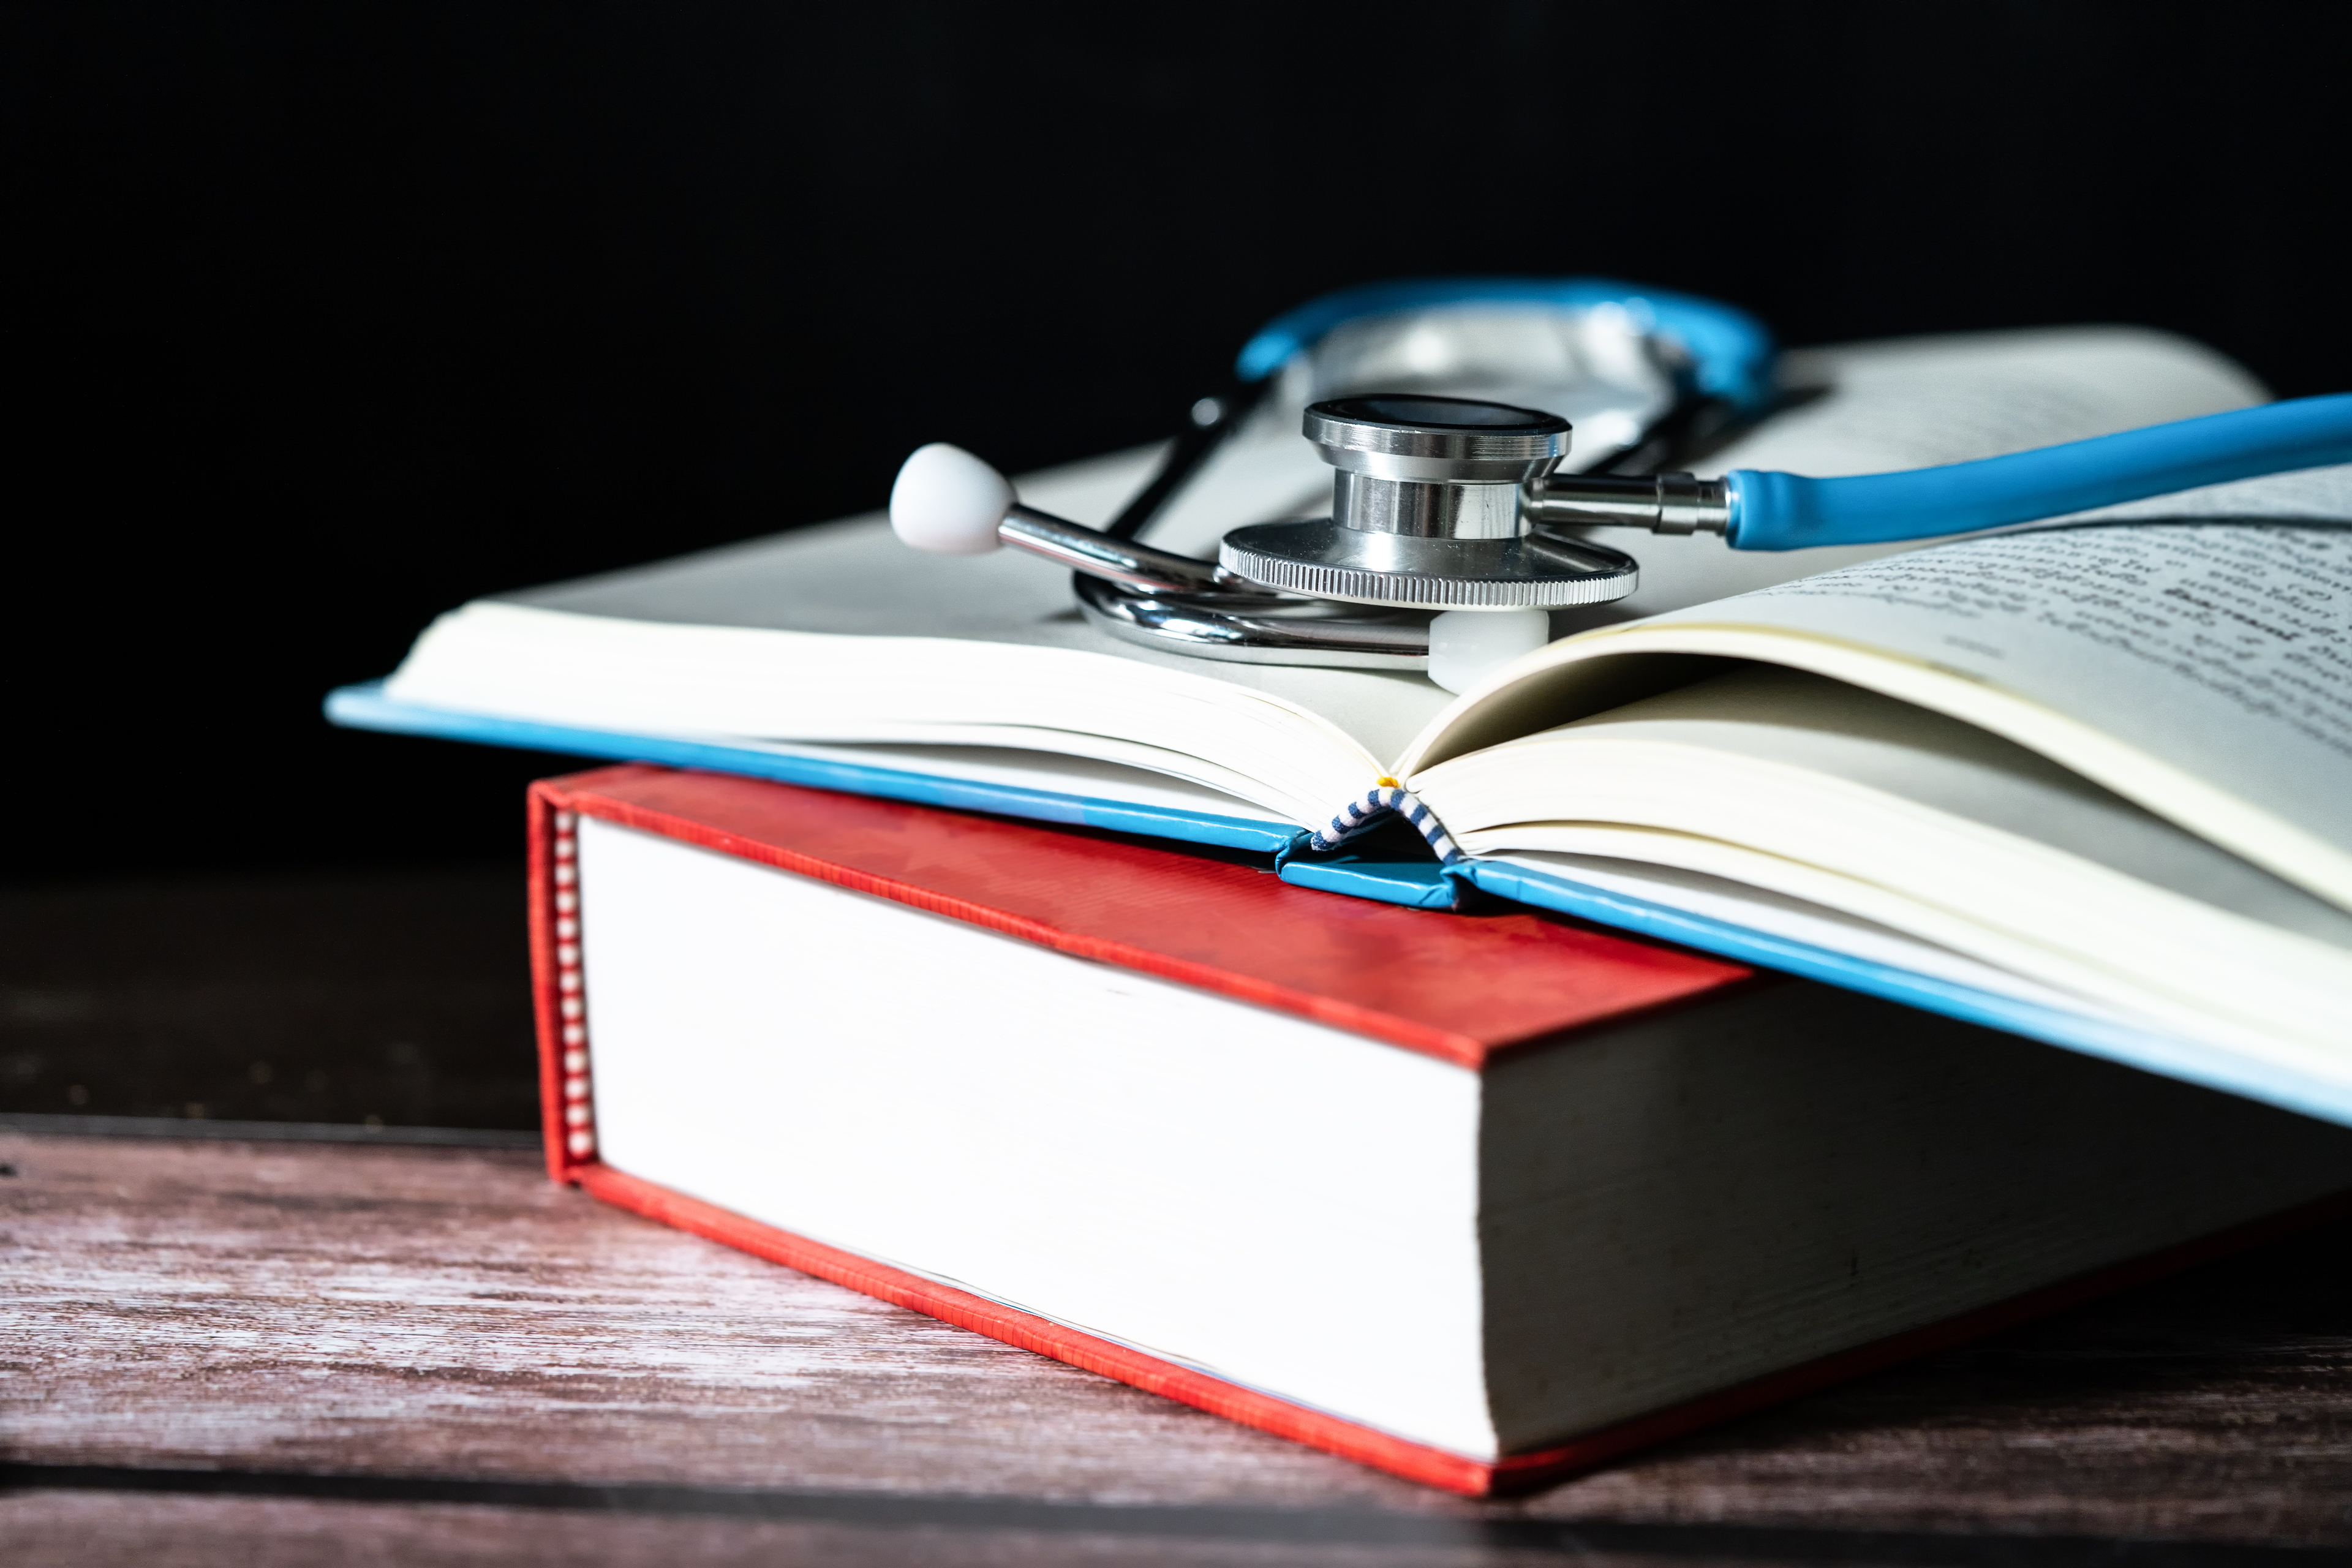 Biology, Anatomy, and Finance? More Med Students Want Business Degrees Too – KFF Health News